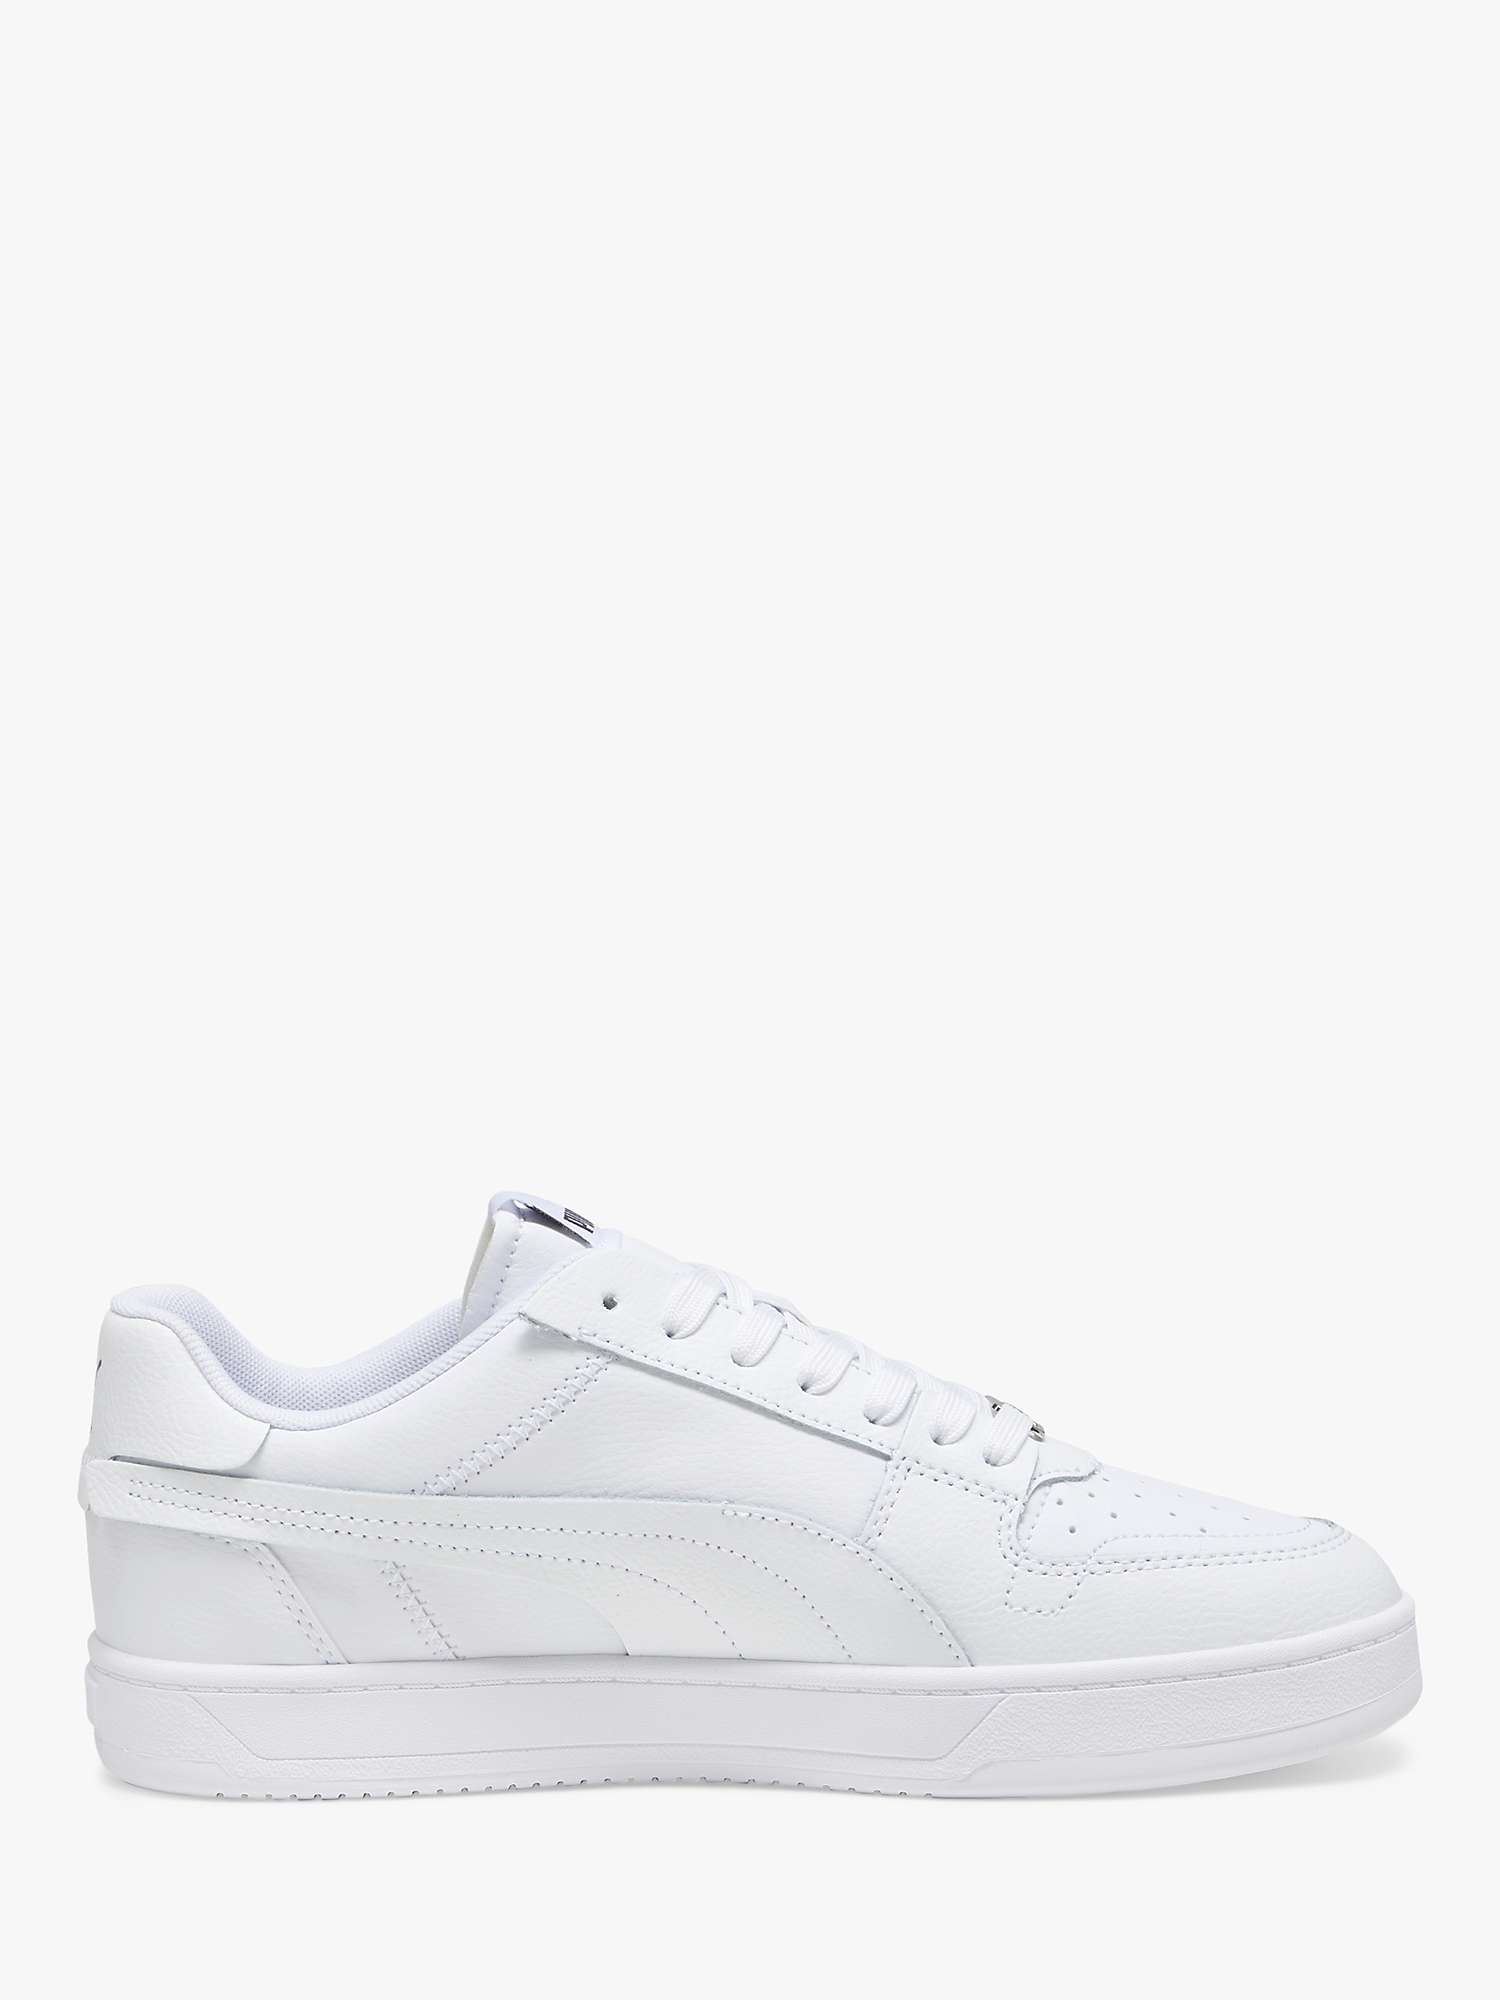 Buy PUMA Classic Caven 2 Lux Trainers Online at johnlewis.com